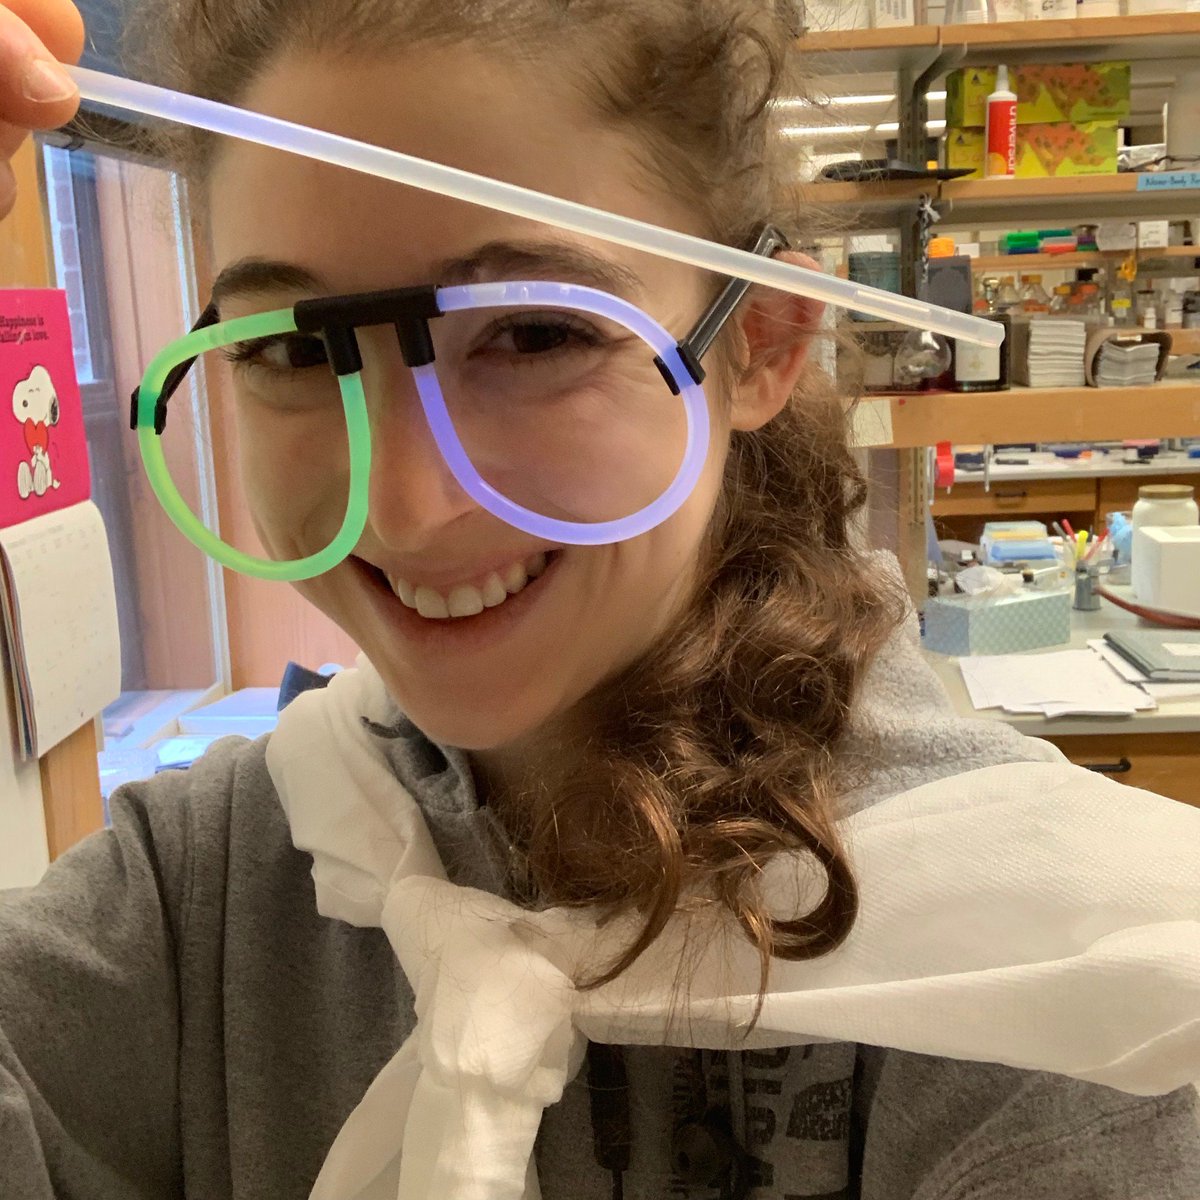 Why are my eyes all aglow? Chemistry! And it’s pretty *dog*gone cool! More pics below & more text   http://bit.ly/2NEid8w  #365DaysOfScience  #biochemistry  #scicomm  #realtimechem